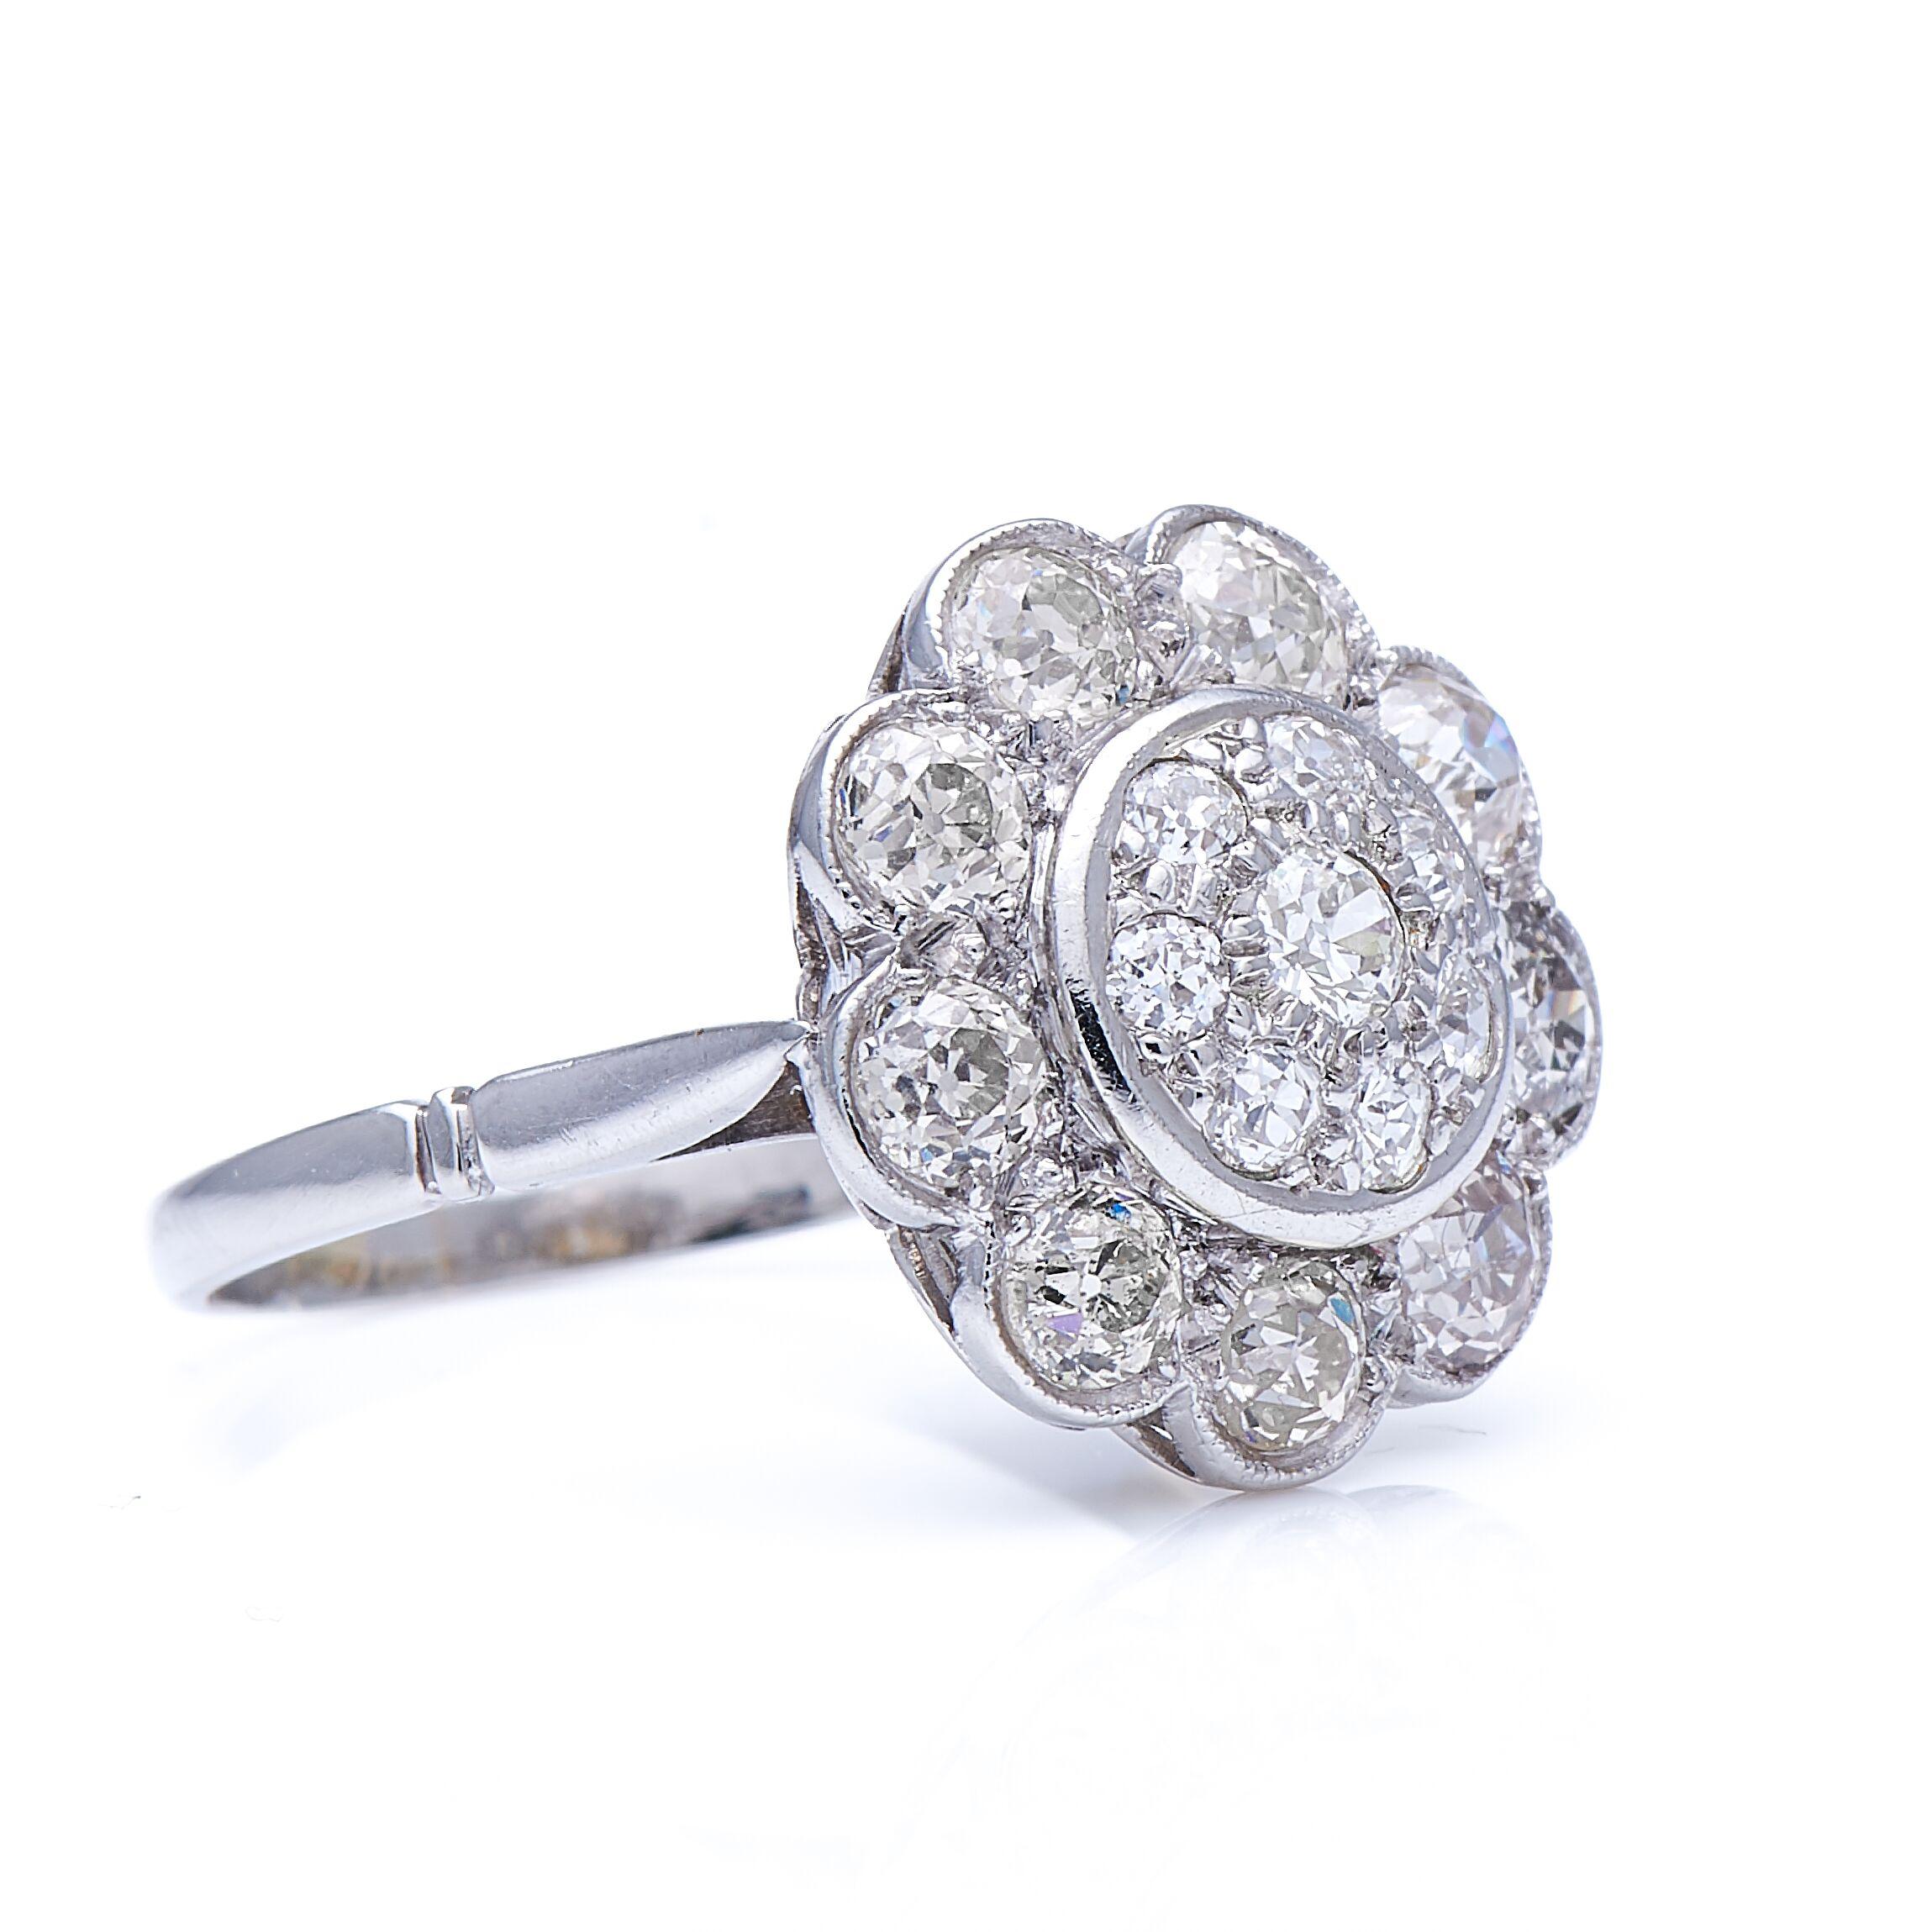 Diamond ring, vintage. A bold, exuberant take on the traditional floral cluster, the bombé centre of this ring is pavé-set with circular-cut diamonds, an glamorous and effective alternative to the usual single central stone. 

MARK
None

METAL
18